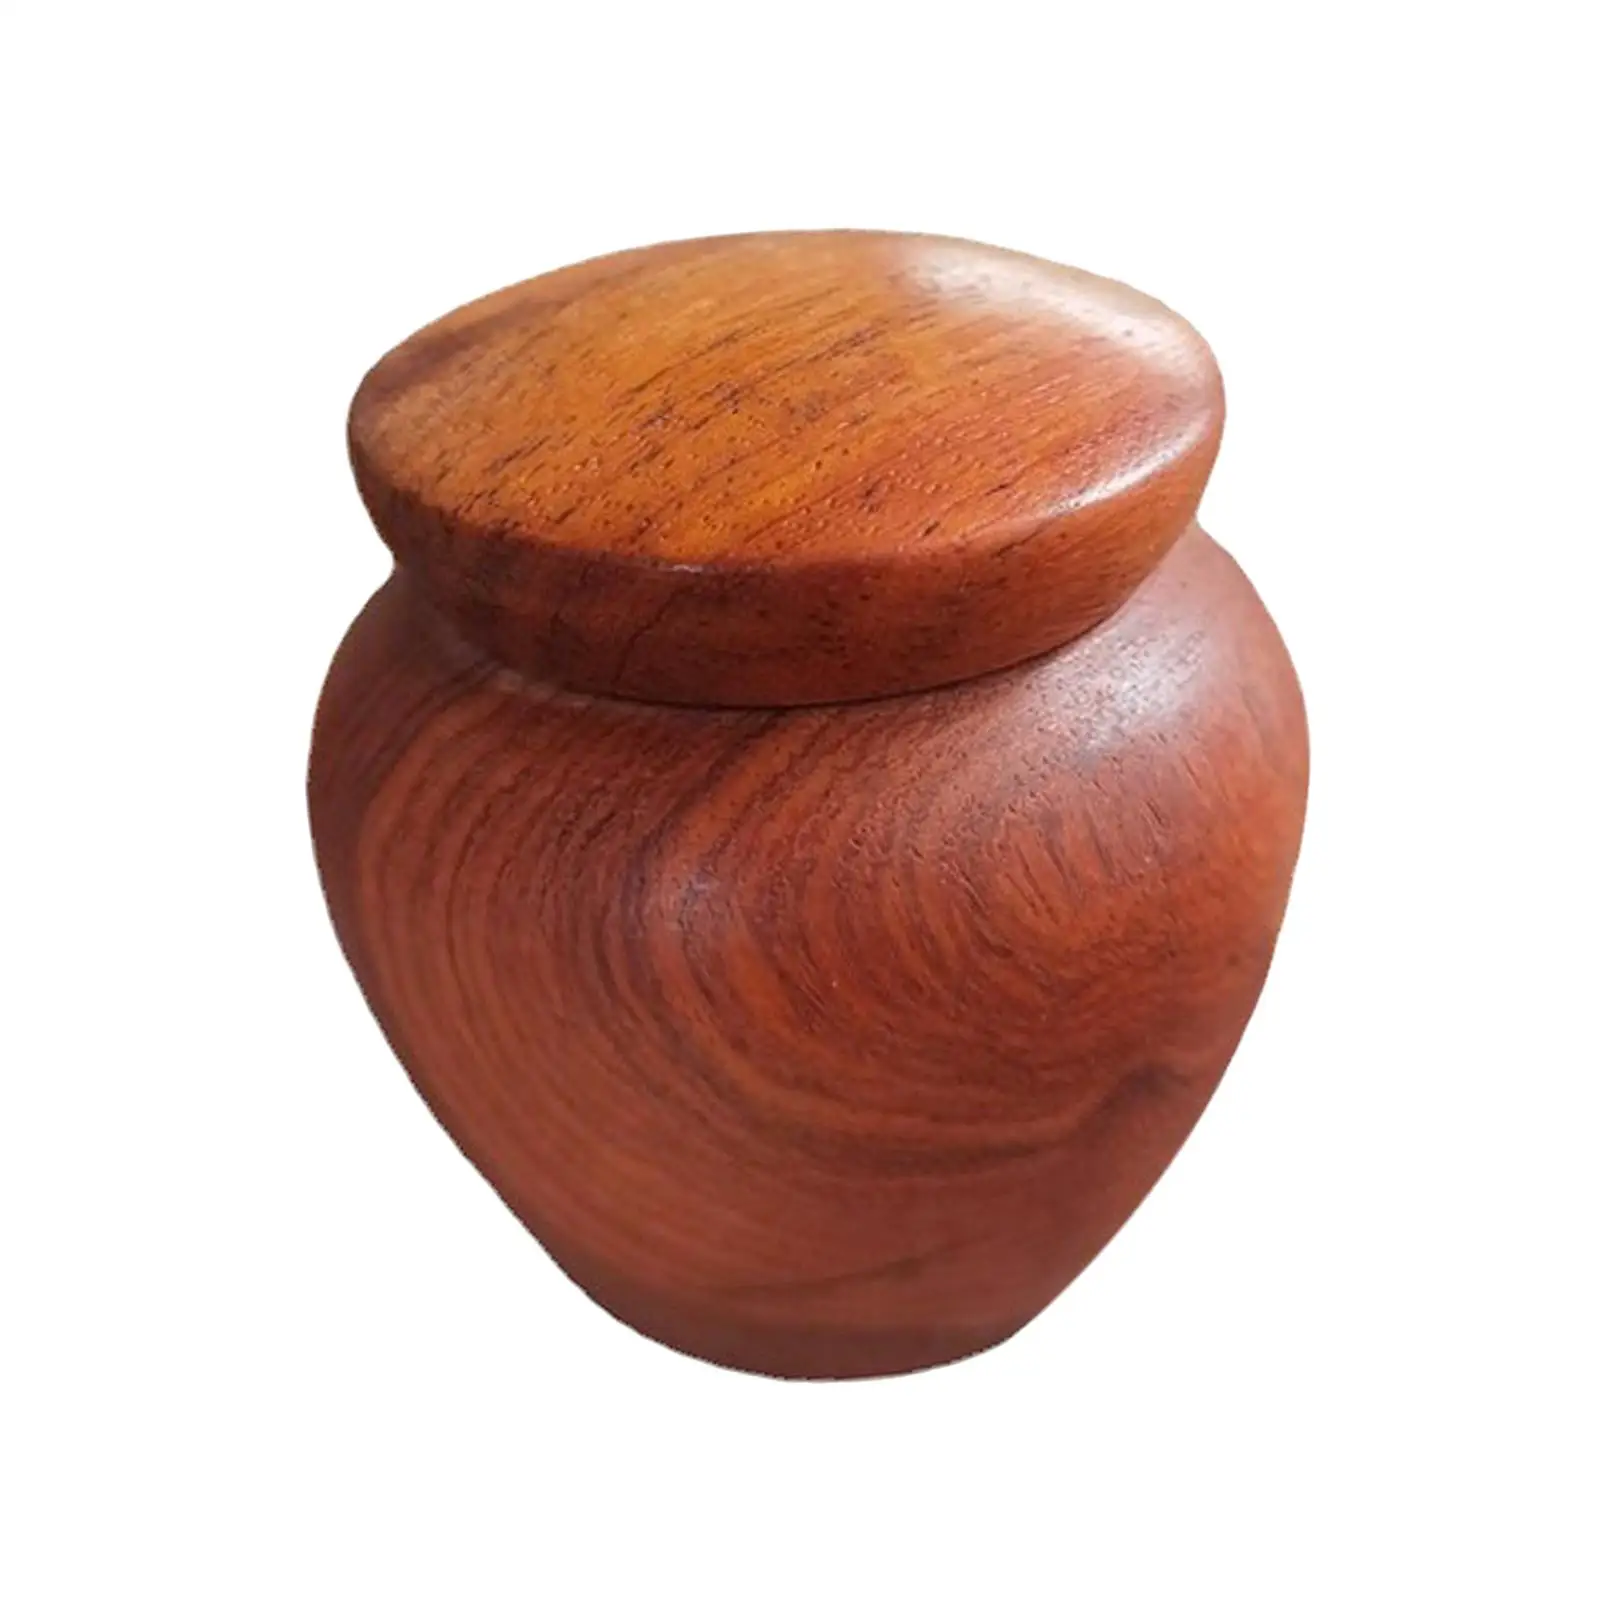 Wooden Storage Jar Seasoning Container Spice Pots Multipurpose Condiment Jar Spice Container Spice Jars for Home Dining Room